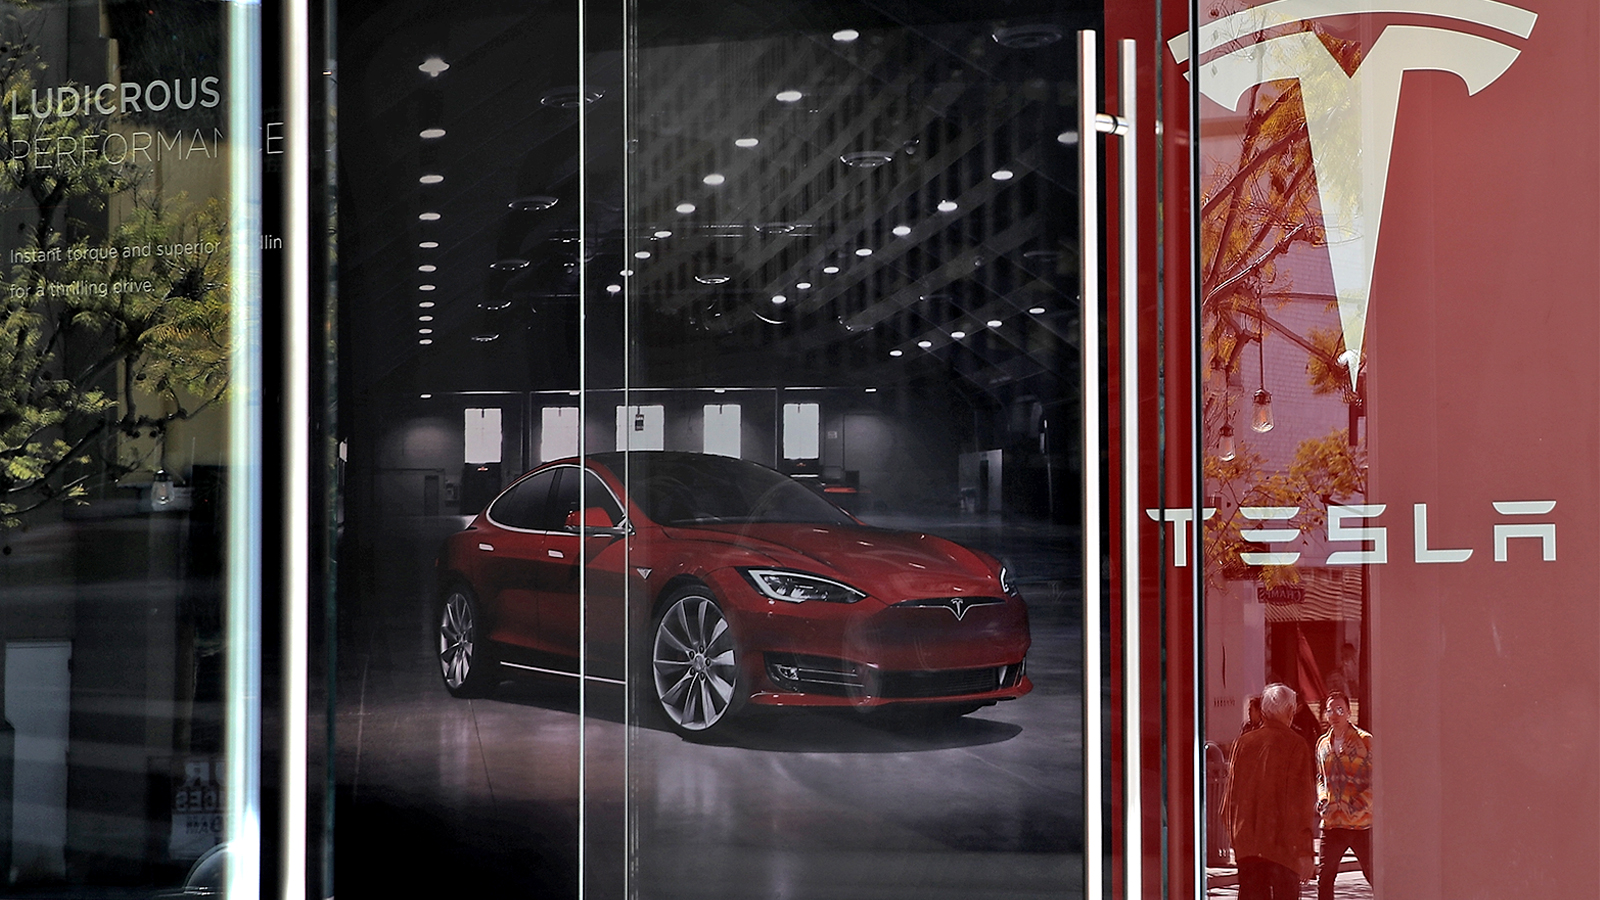 A Tesla showroom seen from the outside; red car and banner with Tesla logo visible through the windows